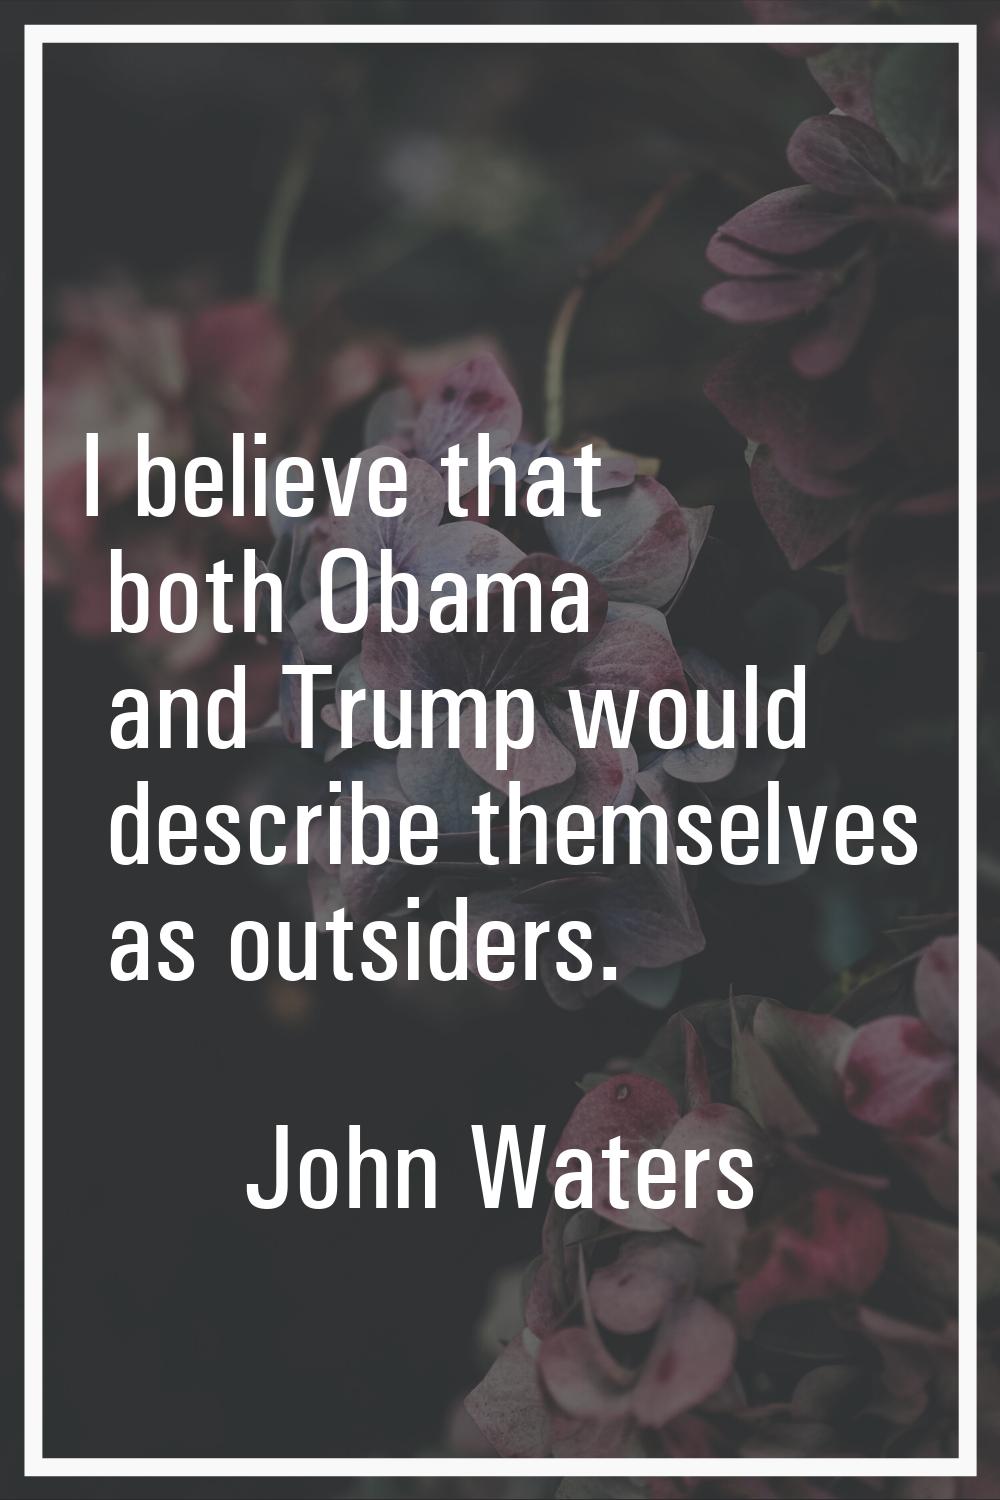 I believe that both Obama and Trump would describe themselves as outsiders.